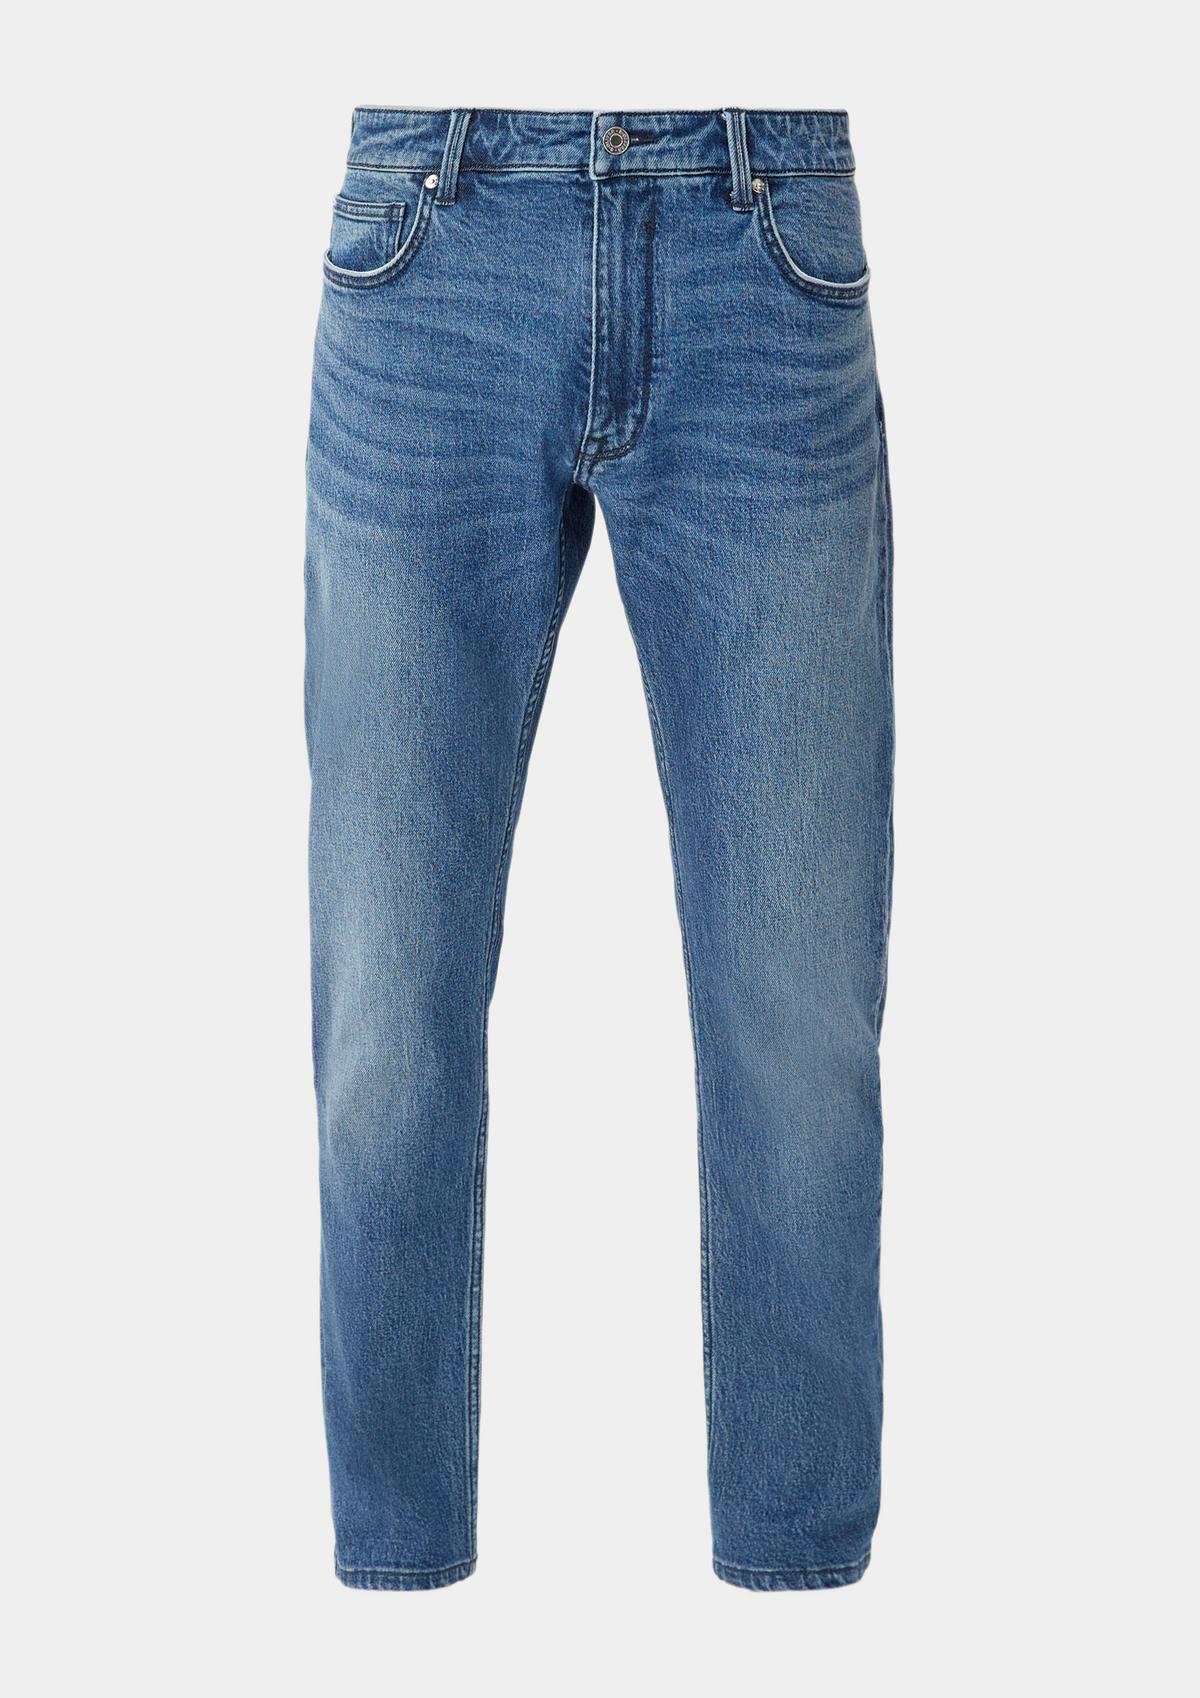 s.Oliver Jeans Keith / Slim Fit / Mid Rise / Slim: Leg